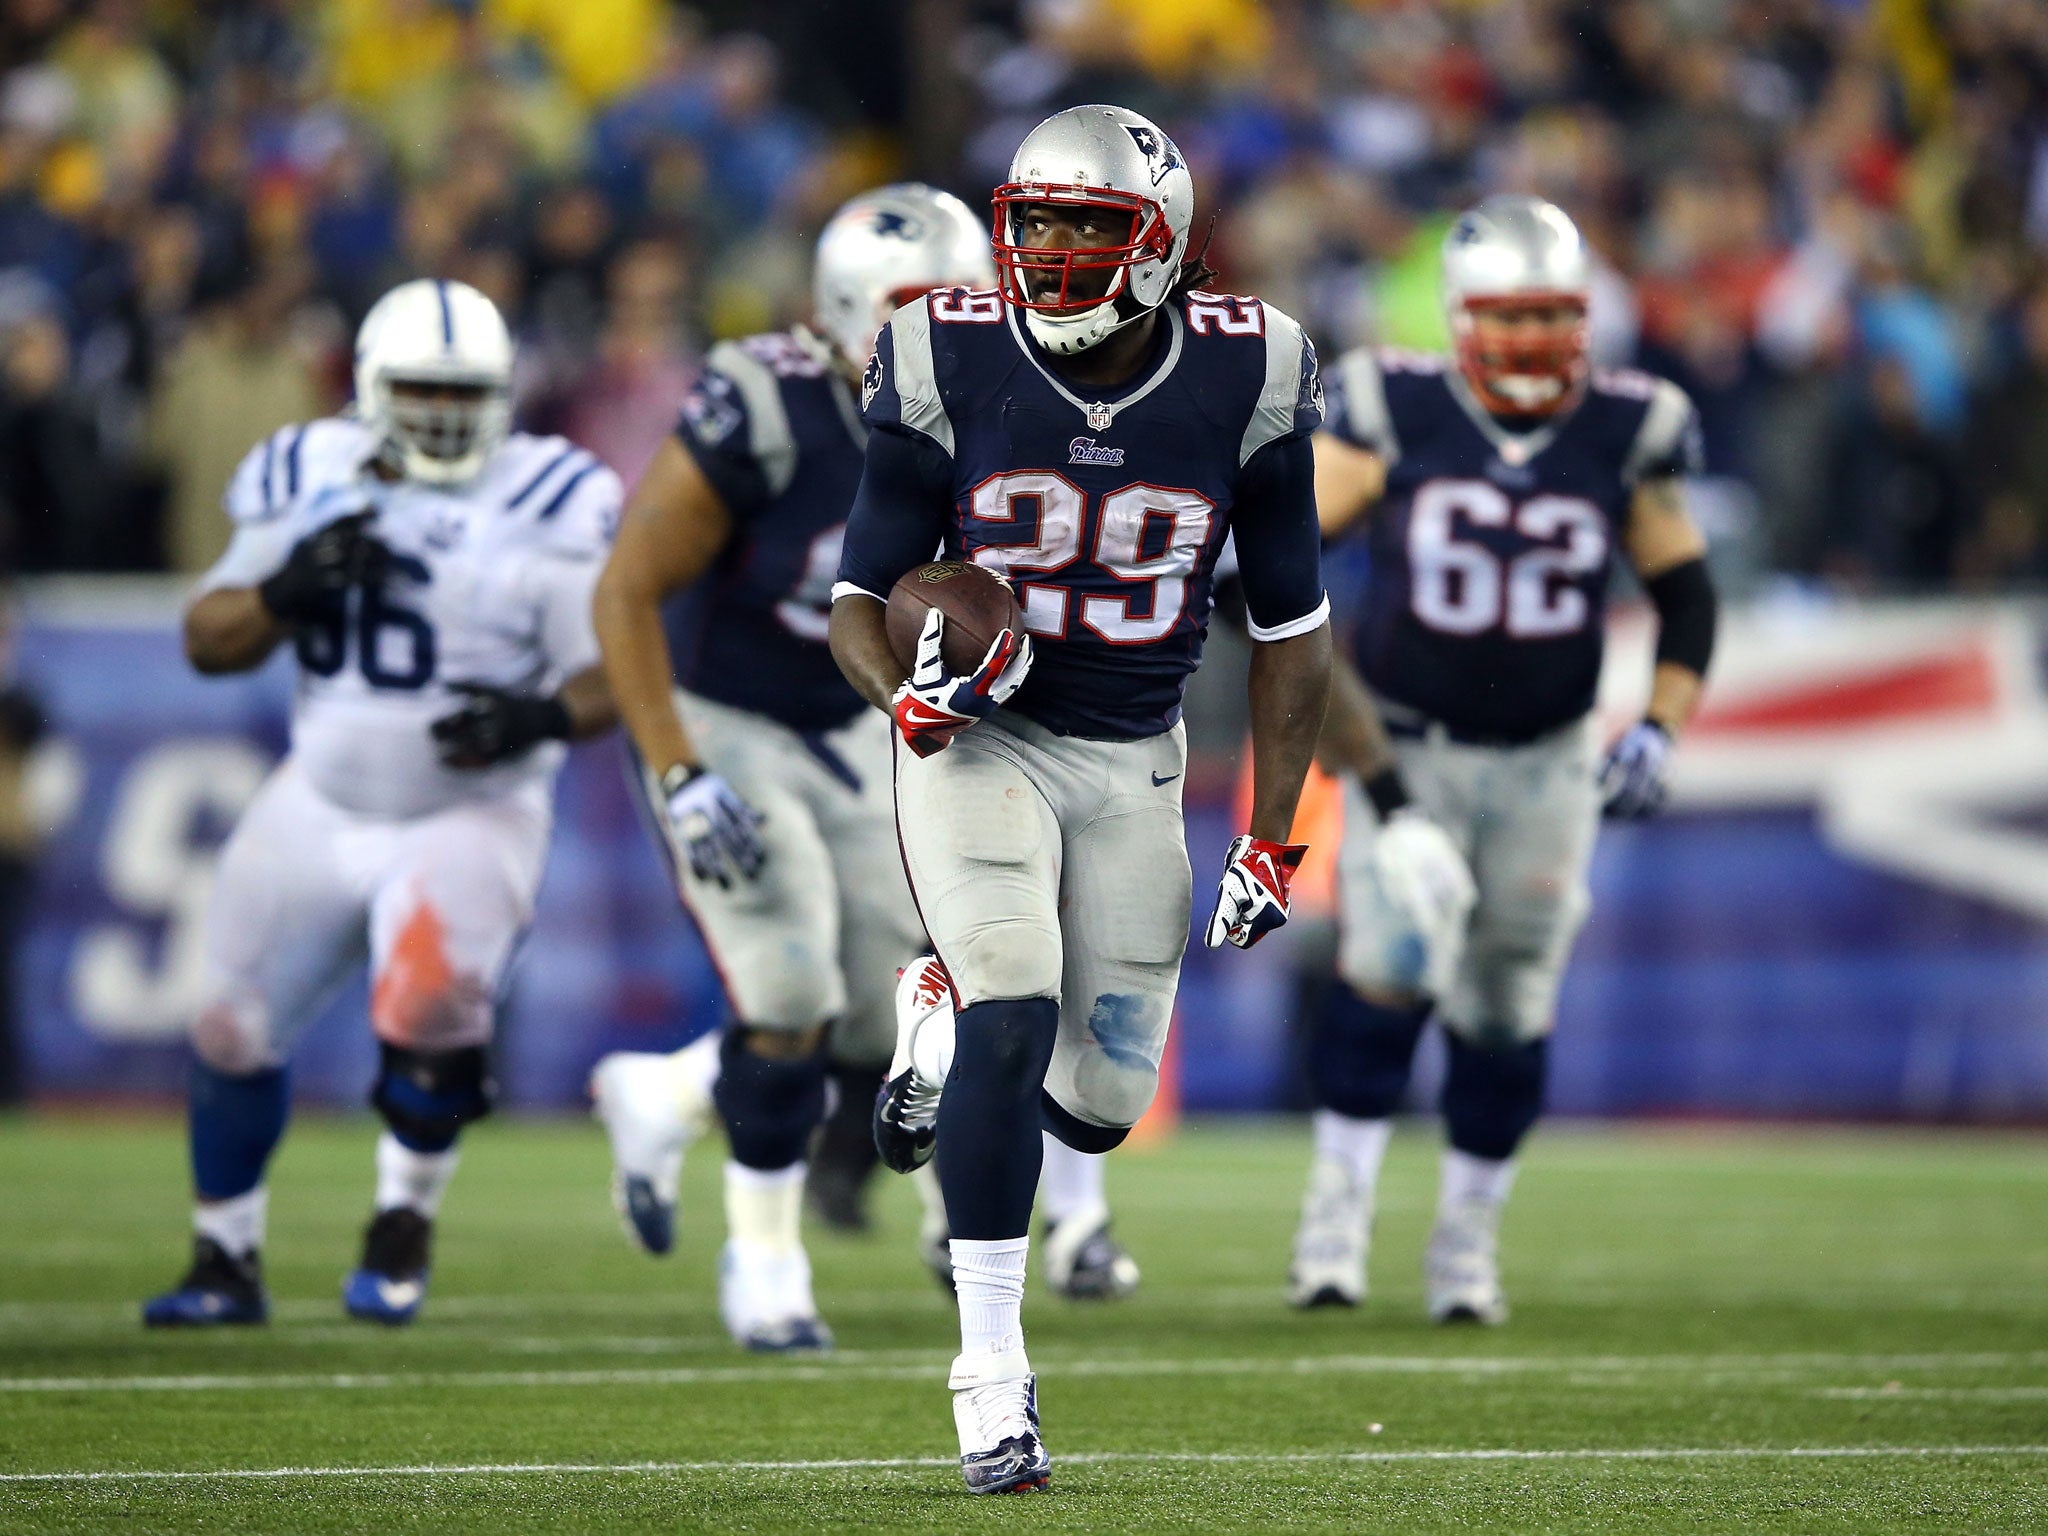 New England Patriots running-back LaGarrette Blount scored a record four rushing touchdowns in the play-off victory over the Indianapolis Colts